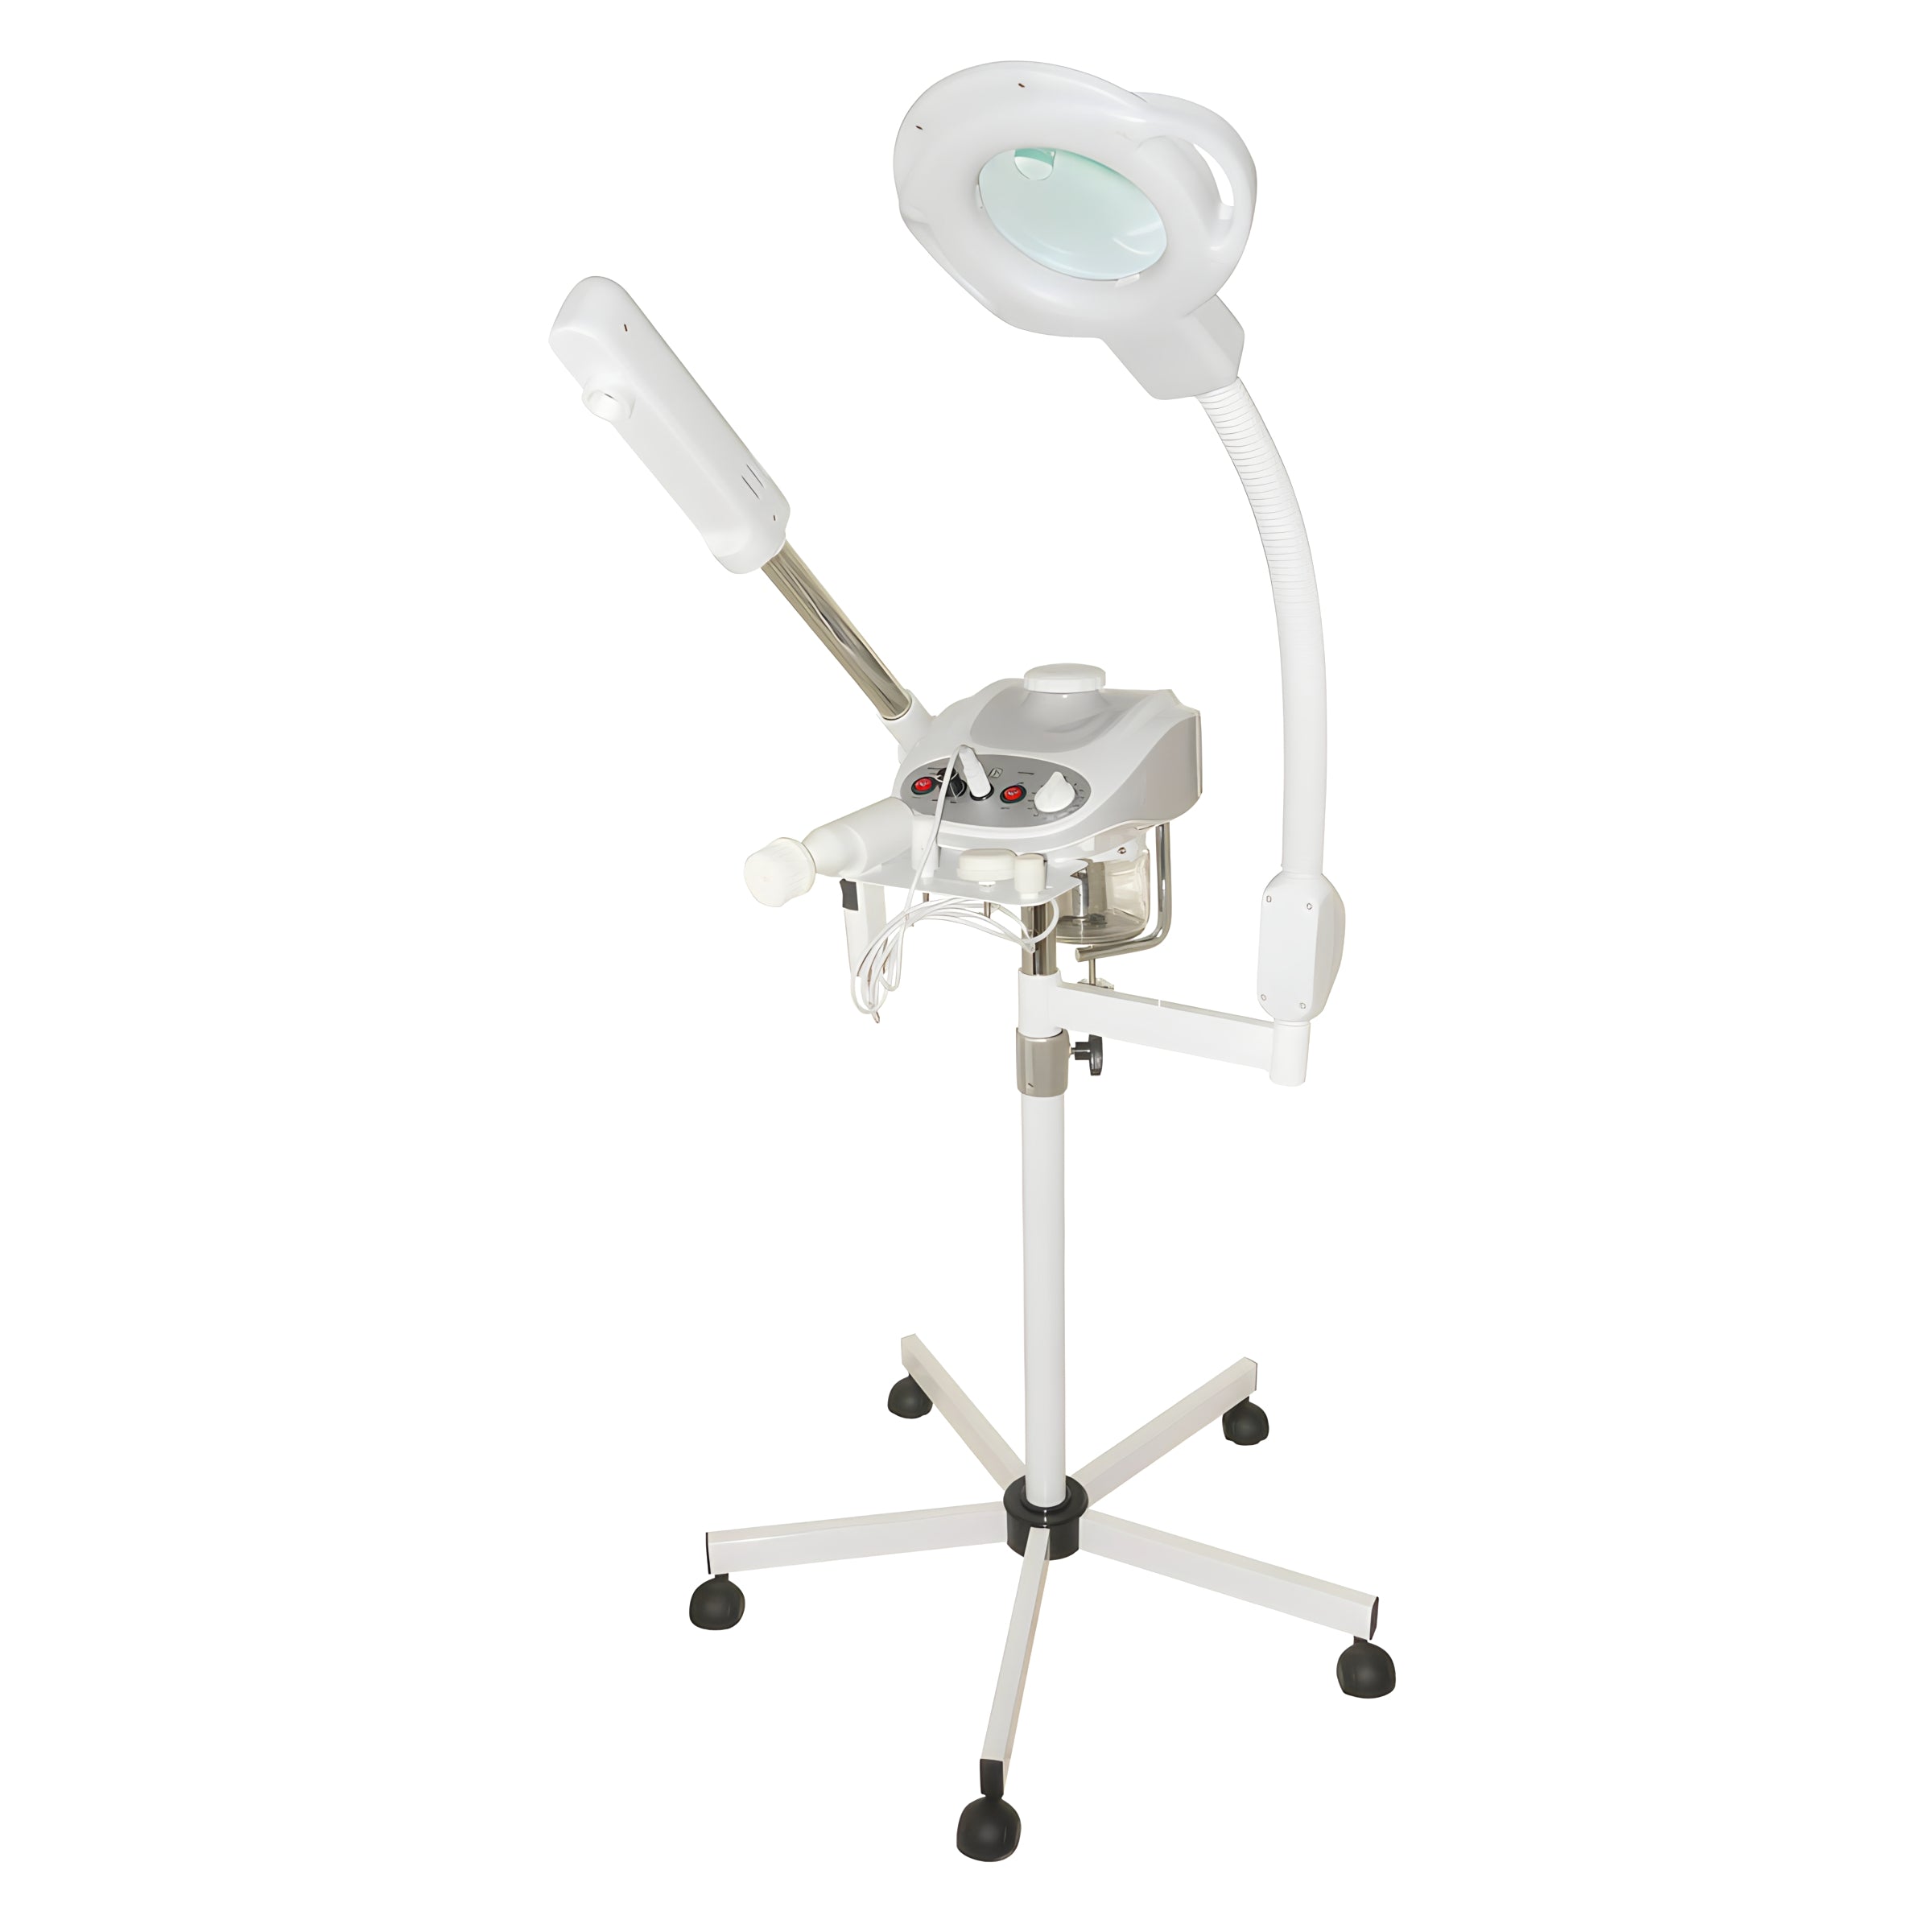 SPAMARC . Digital Ozone Facial Steamer & 5 Diopter Magnifying Lamp